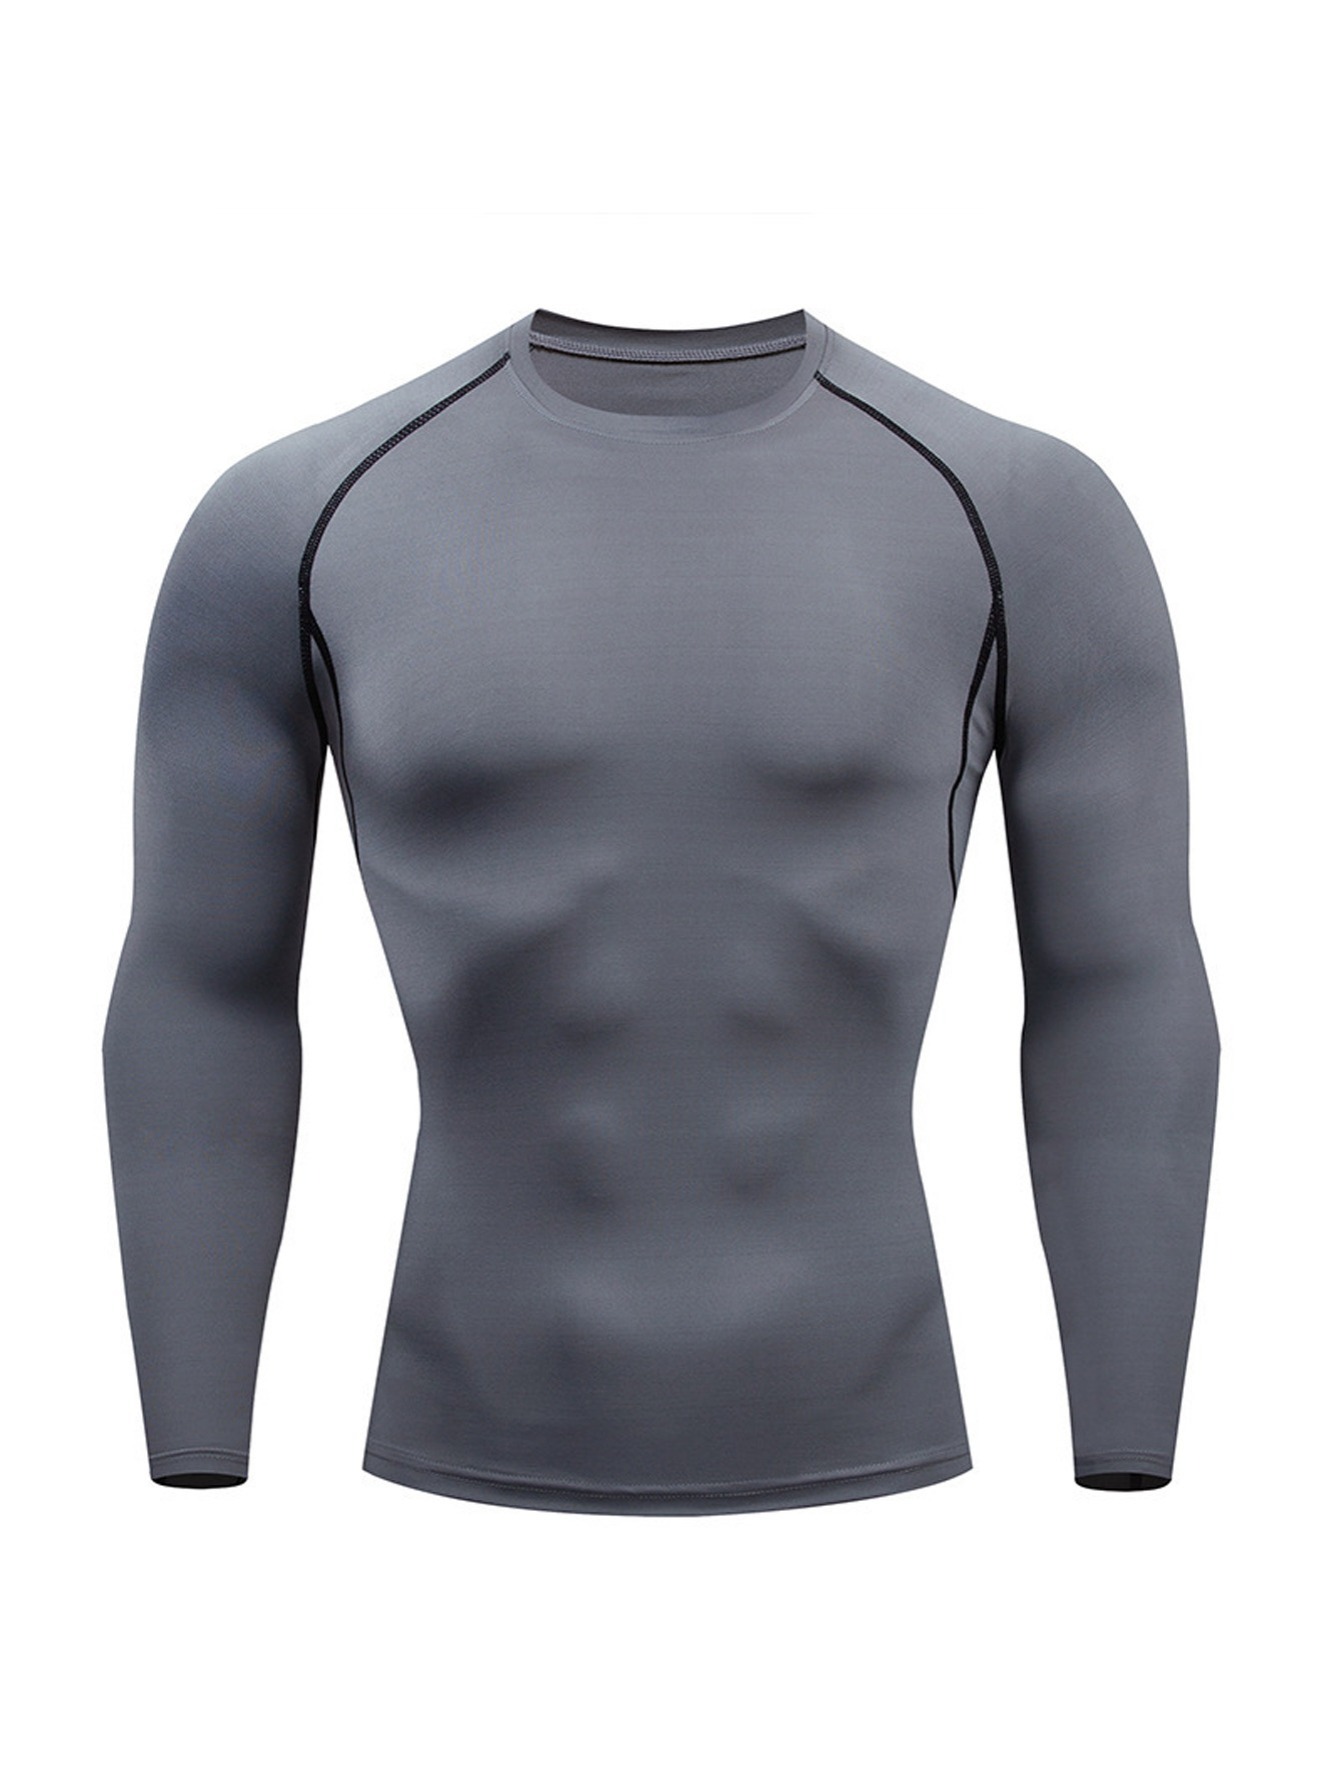 Men's Grey Compression Shirts: Quick-Dry Long Sleeve Athletic Workout Tops  for Maximum Performance!